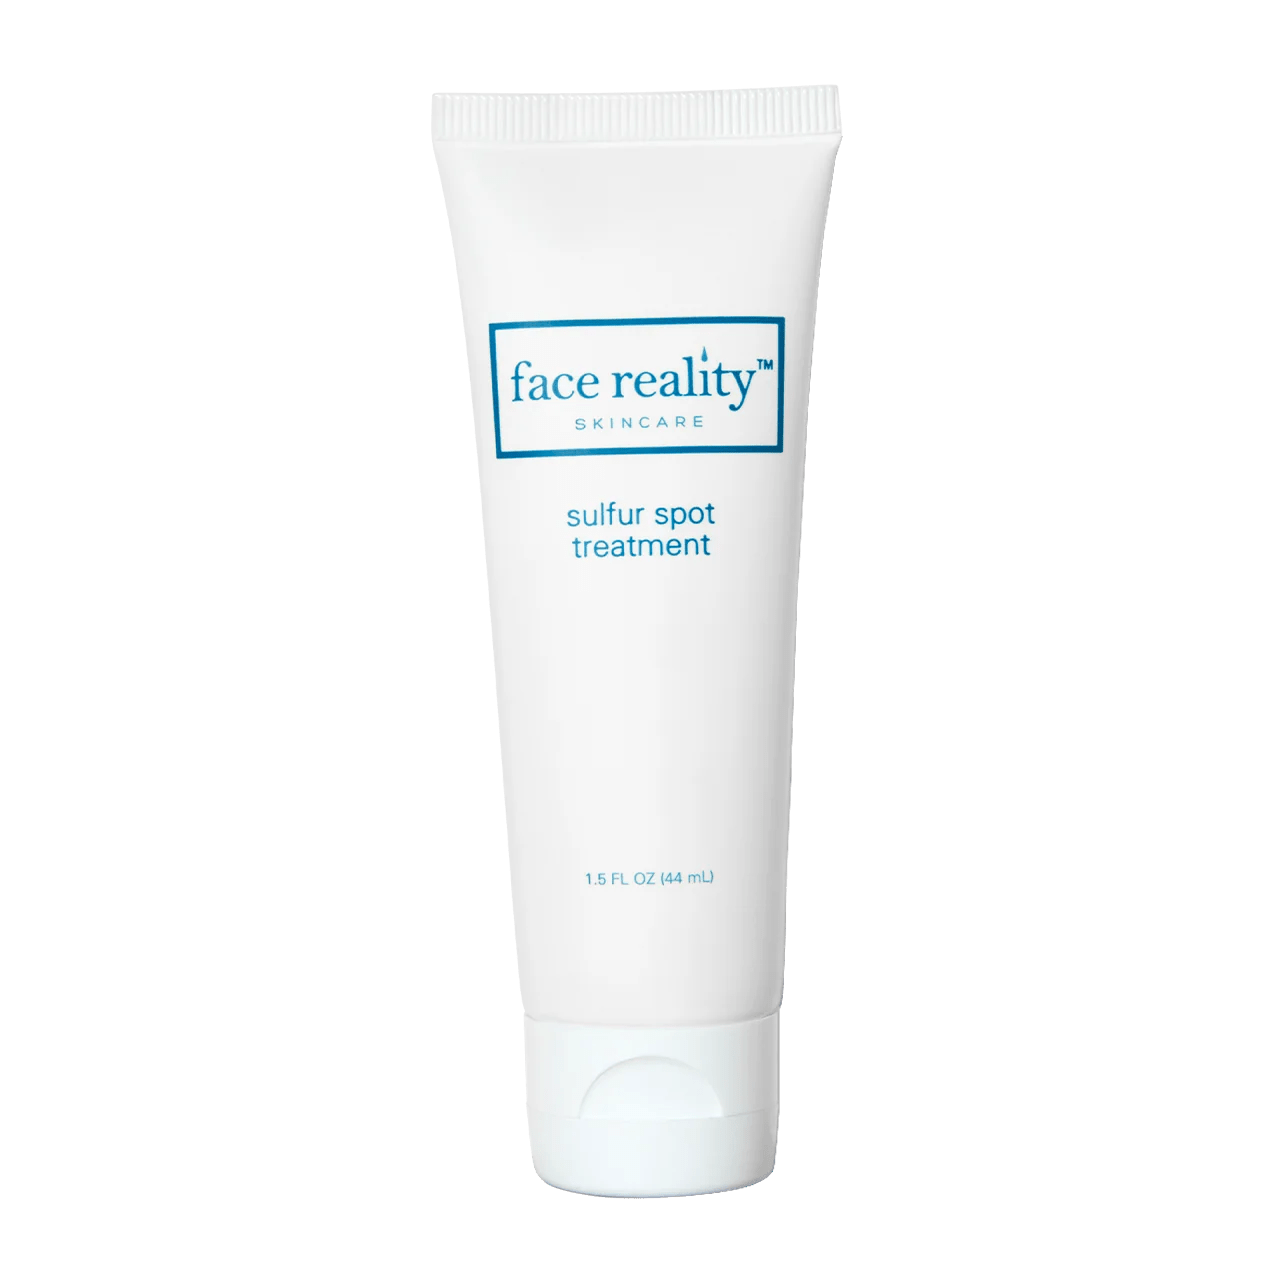 Face Reality Skincare Sulfur Spot Treatment, A Clear Complexion Within Reach